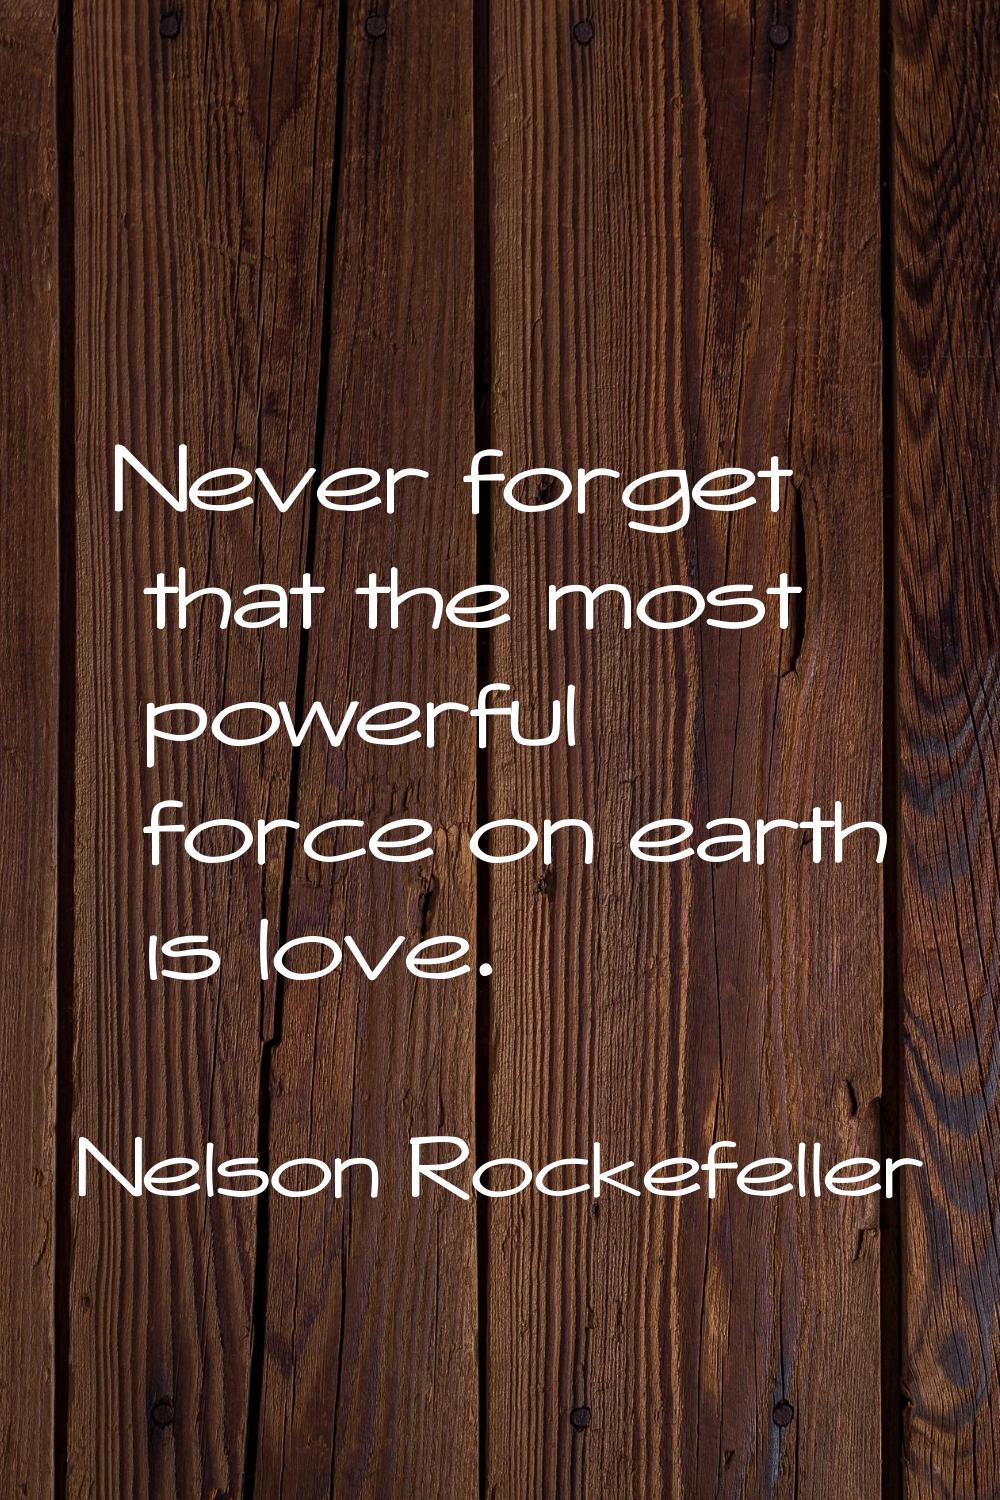 Never forget that the most powerful force on earth is love.